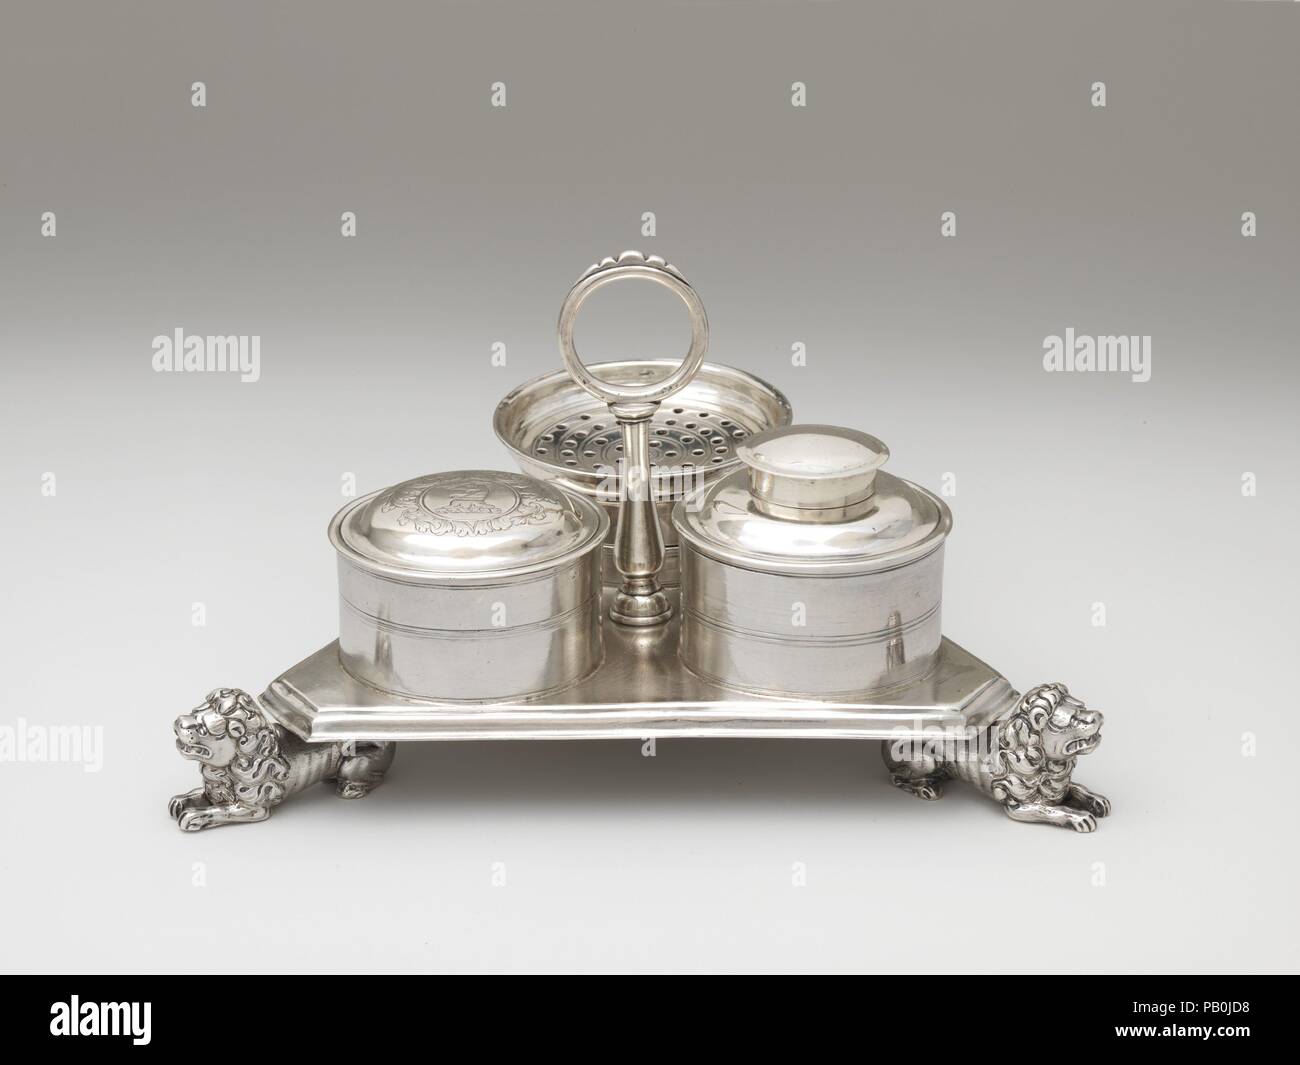 Inkstand. Culture: American. Dimensions: Overall: 4 1/8 x 6 1/2 in. (10.5 x 16.5 cm); 23 oz. 14 dwt. (736.7 g)  Glass ink pot with silver cover: 1 3/4 x 2 1/4 in. (4.4 x 5.7 cm); 4 oz. 12 dwt. (143.3 g)  Pounce pot: 1 1/8 x 2 5/8 in. (2.9 x 6.7 cm); 2 oz. 10 dwt. (78.2 g)  Wafer pot cover: 9/16 x 2 5/16 in. (1.4 x 5.9 cm); 1 oz. 2 dwt. (34.5 g)  Stand and attached parts: 15 oz. 9 dwt. (480.7 g). Maker: John Coney (1655/56-1722). Date: 1710-20.  This rare triangular inkstand on cast lion's feet belonged to the colonial governor Jonathan Belcher. Museum: Metropolitan Museum of Art, New York, USA Stock Photo